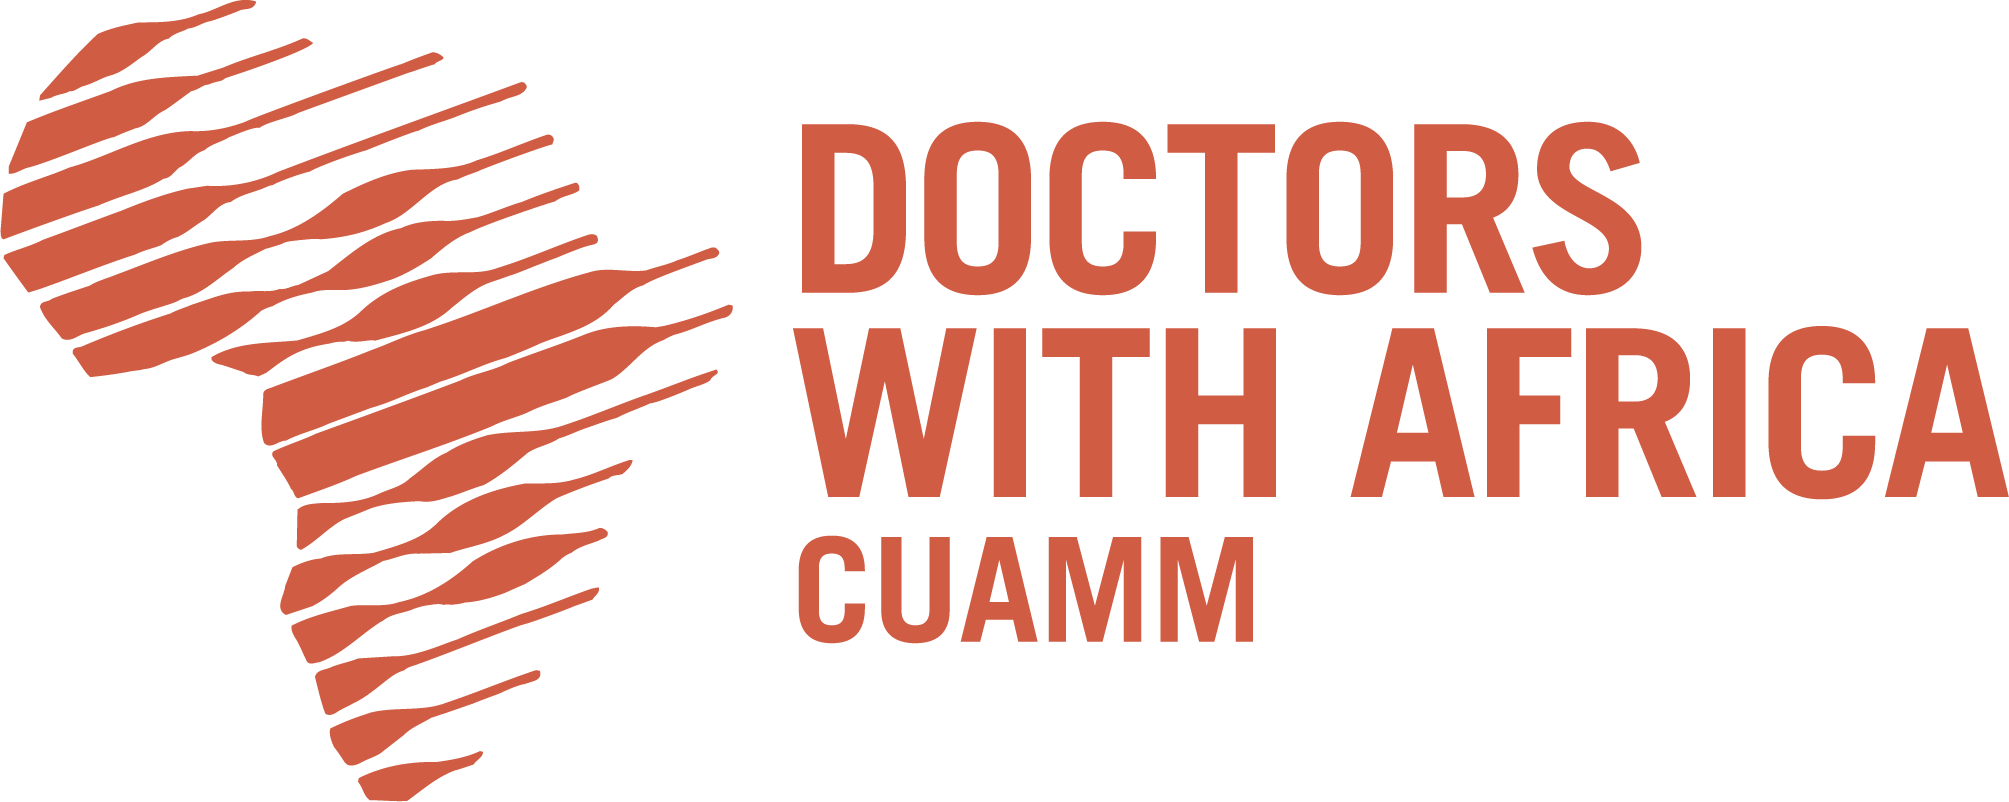 Doctors with Africa CUAMM Logo